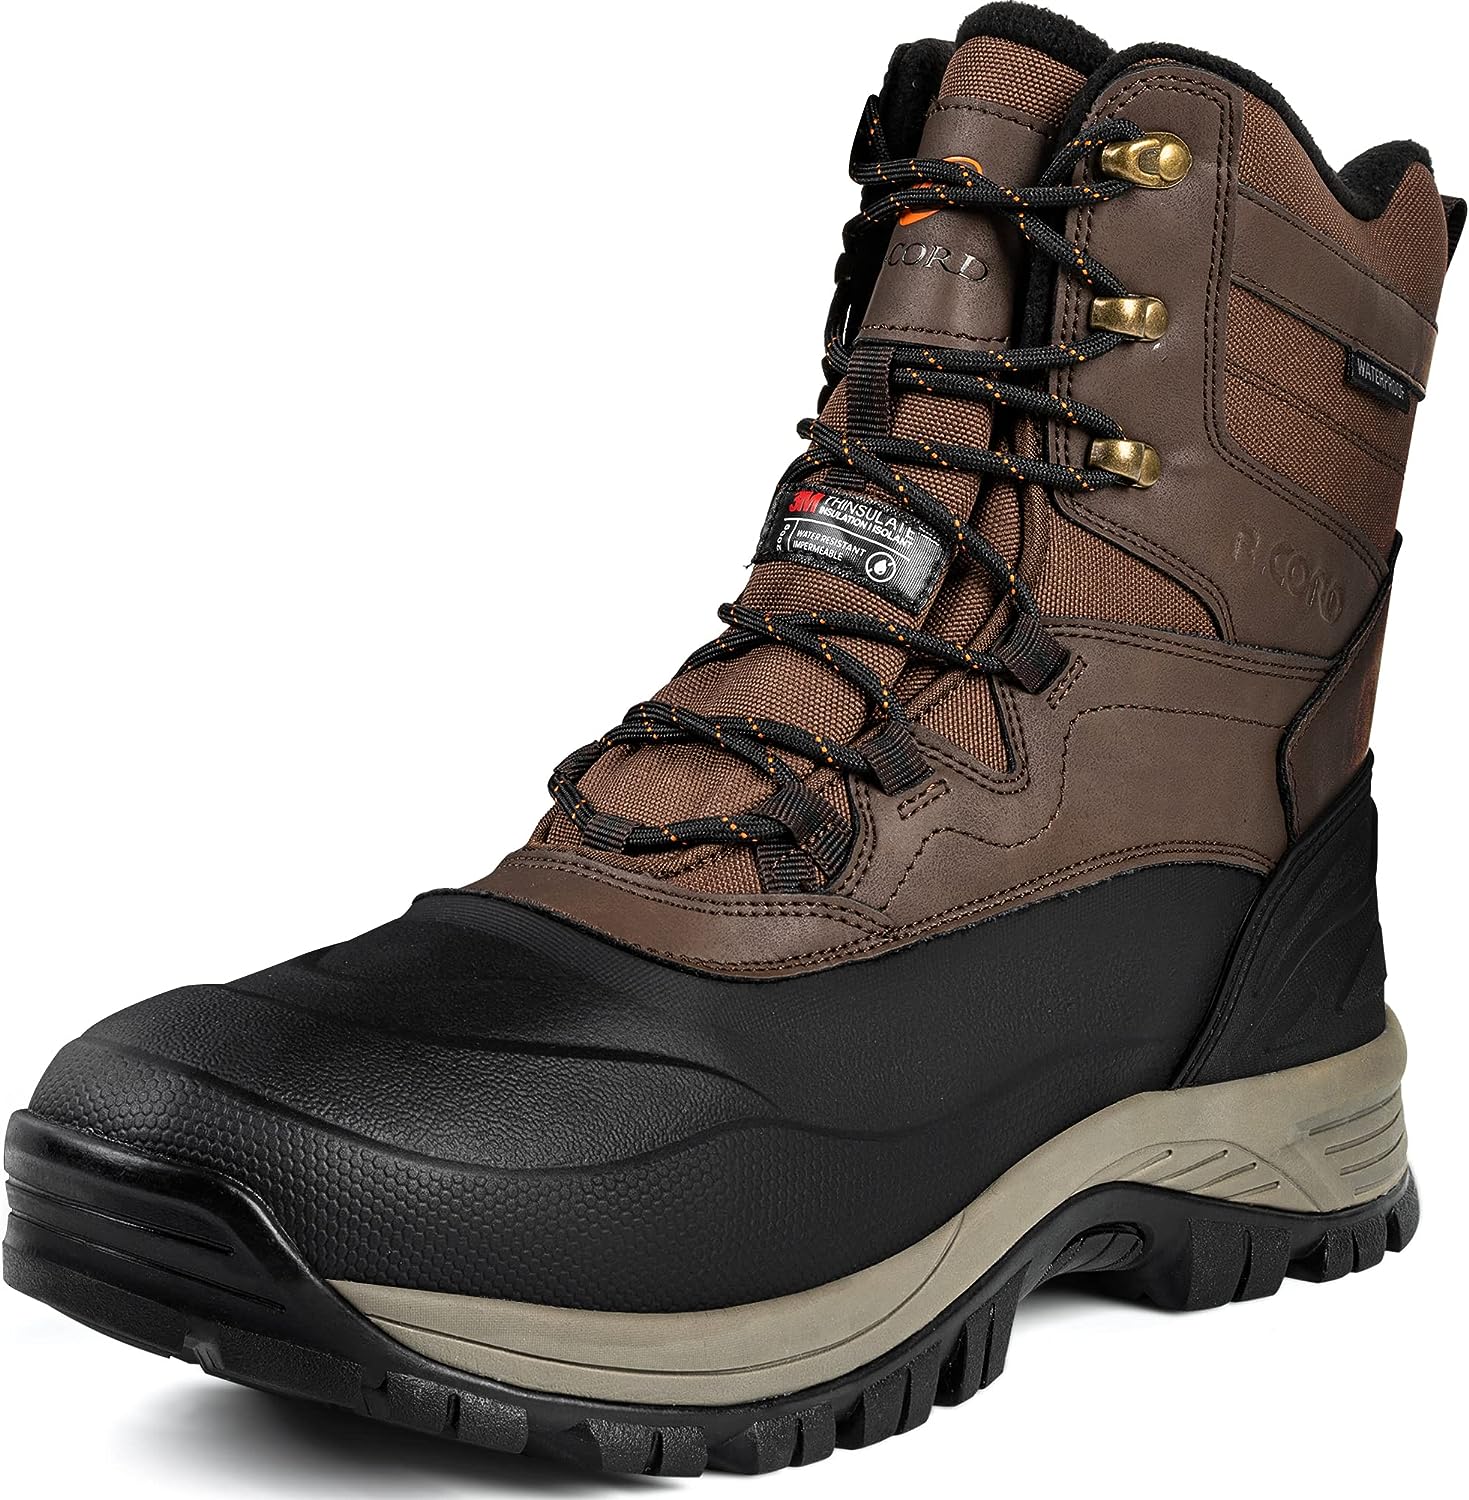 @ R CORD Snow Boots for Men Waterproof Insulated [...]